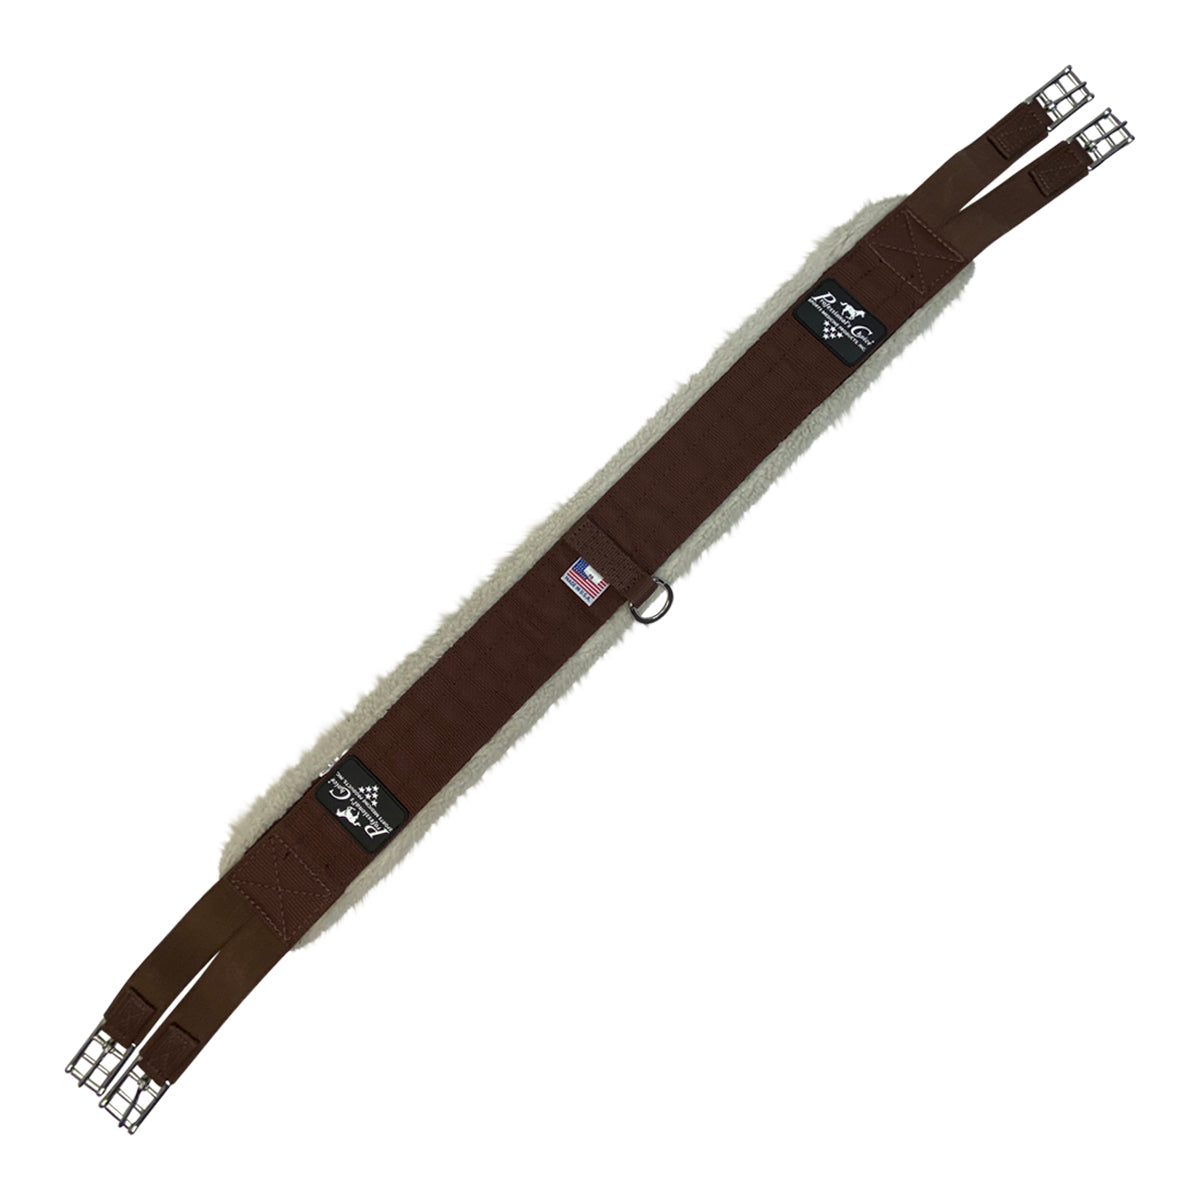 Professional's Choice SMx Fleece Girth in Brown